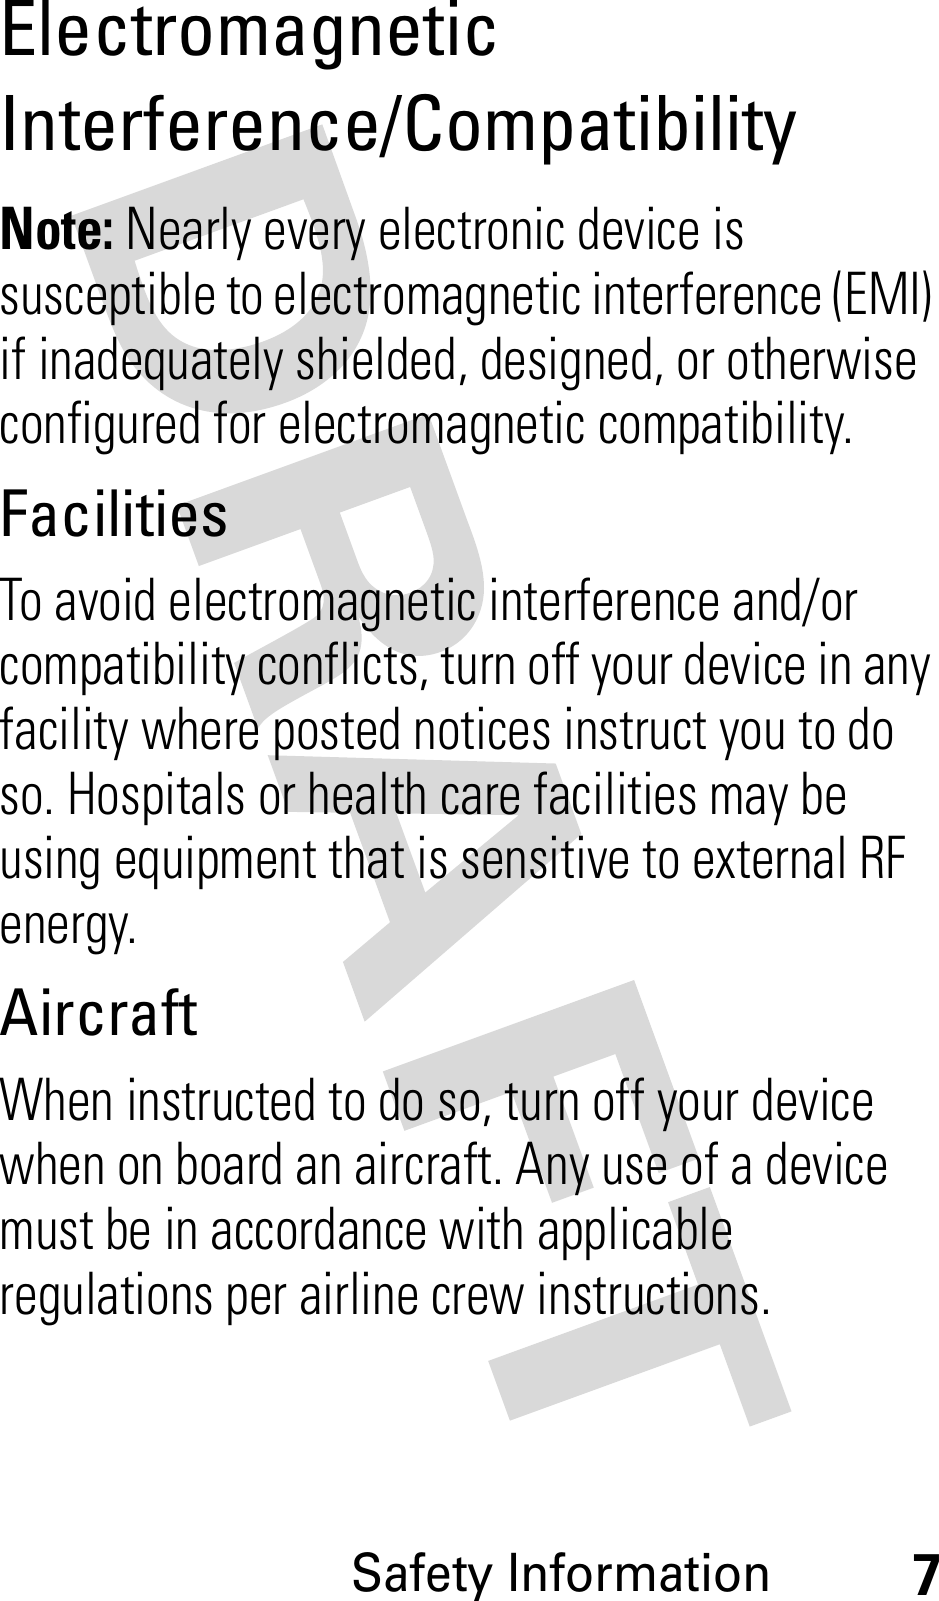 Safety Information7ElectromagneticInterference/CompatibilityNote: Nearly every electronic device is susceptible to electromagnetic interference (EMI) if inadequately shielded, designed, or otherwise configured for electromagnetic compatibility.FacilitiesTo avoid electromagnetic interference and/or compatibility conflicts, turn off your device in any facility where posted notices instruct you to do so. Hospitals or health care facilities may be using equipment that is sensitive to external RF energy.AircraftWhen instructed to do so, turn off your device when on board an aircraft. Any use of a device must be in accordance with applicable regulations per airline crew instructions.